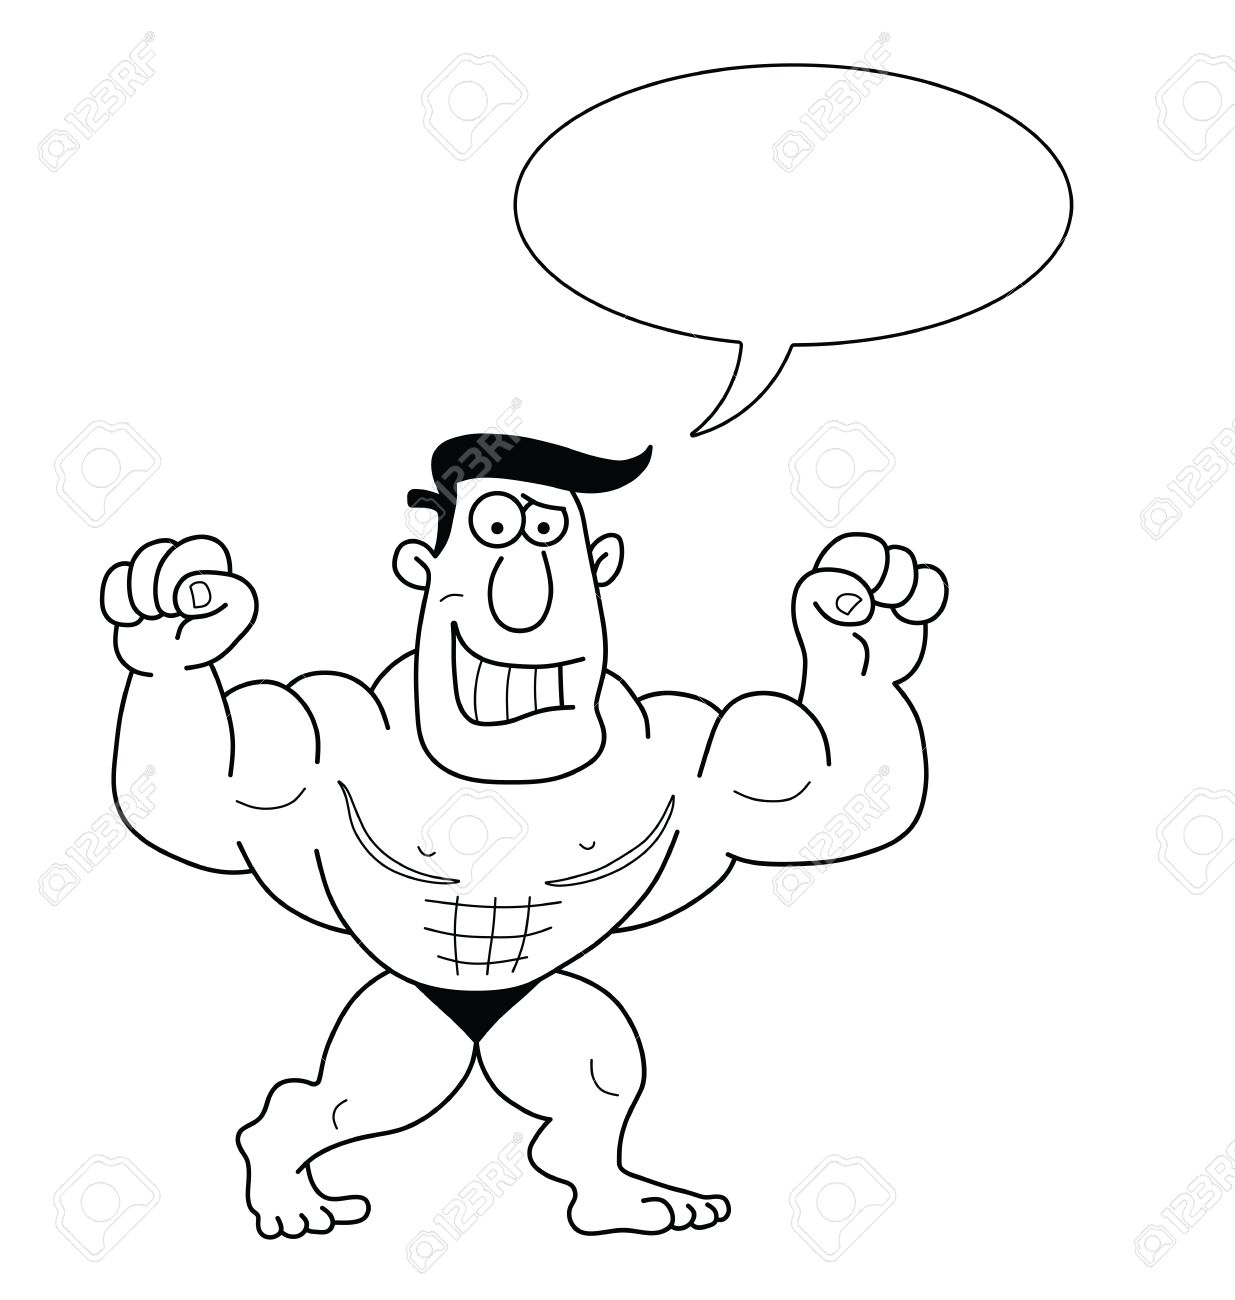 Monochrome Outline Cartoon Strongman With Speech Bubble For Own